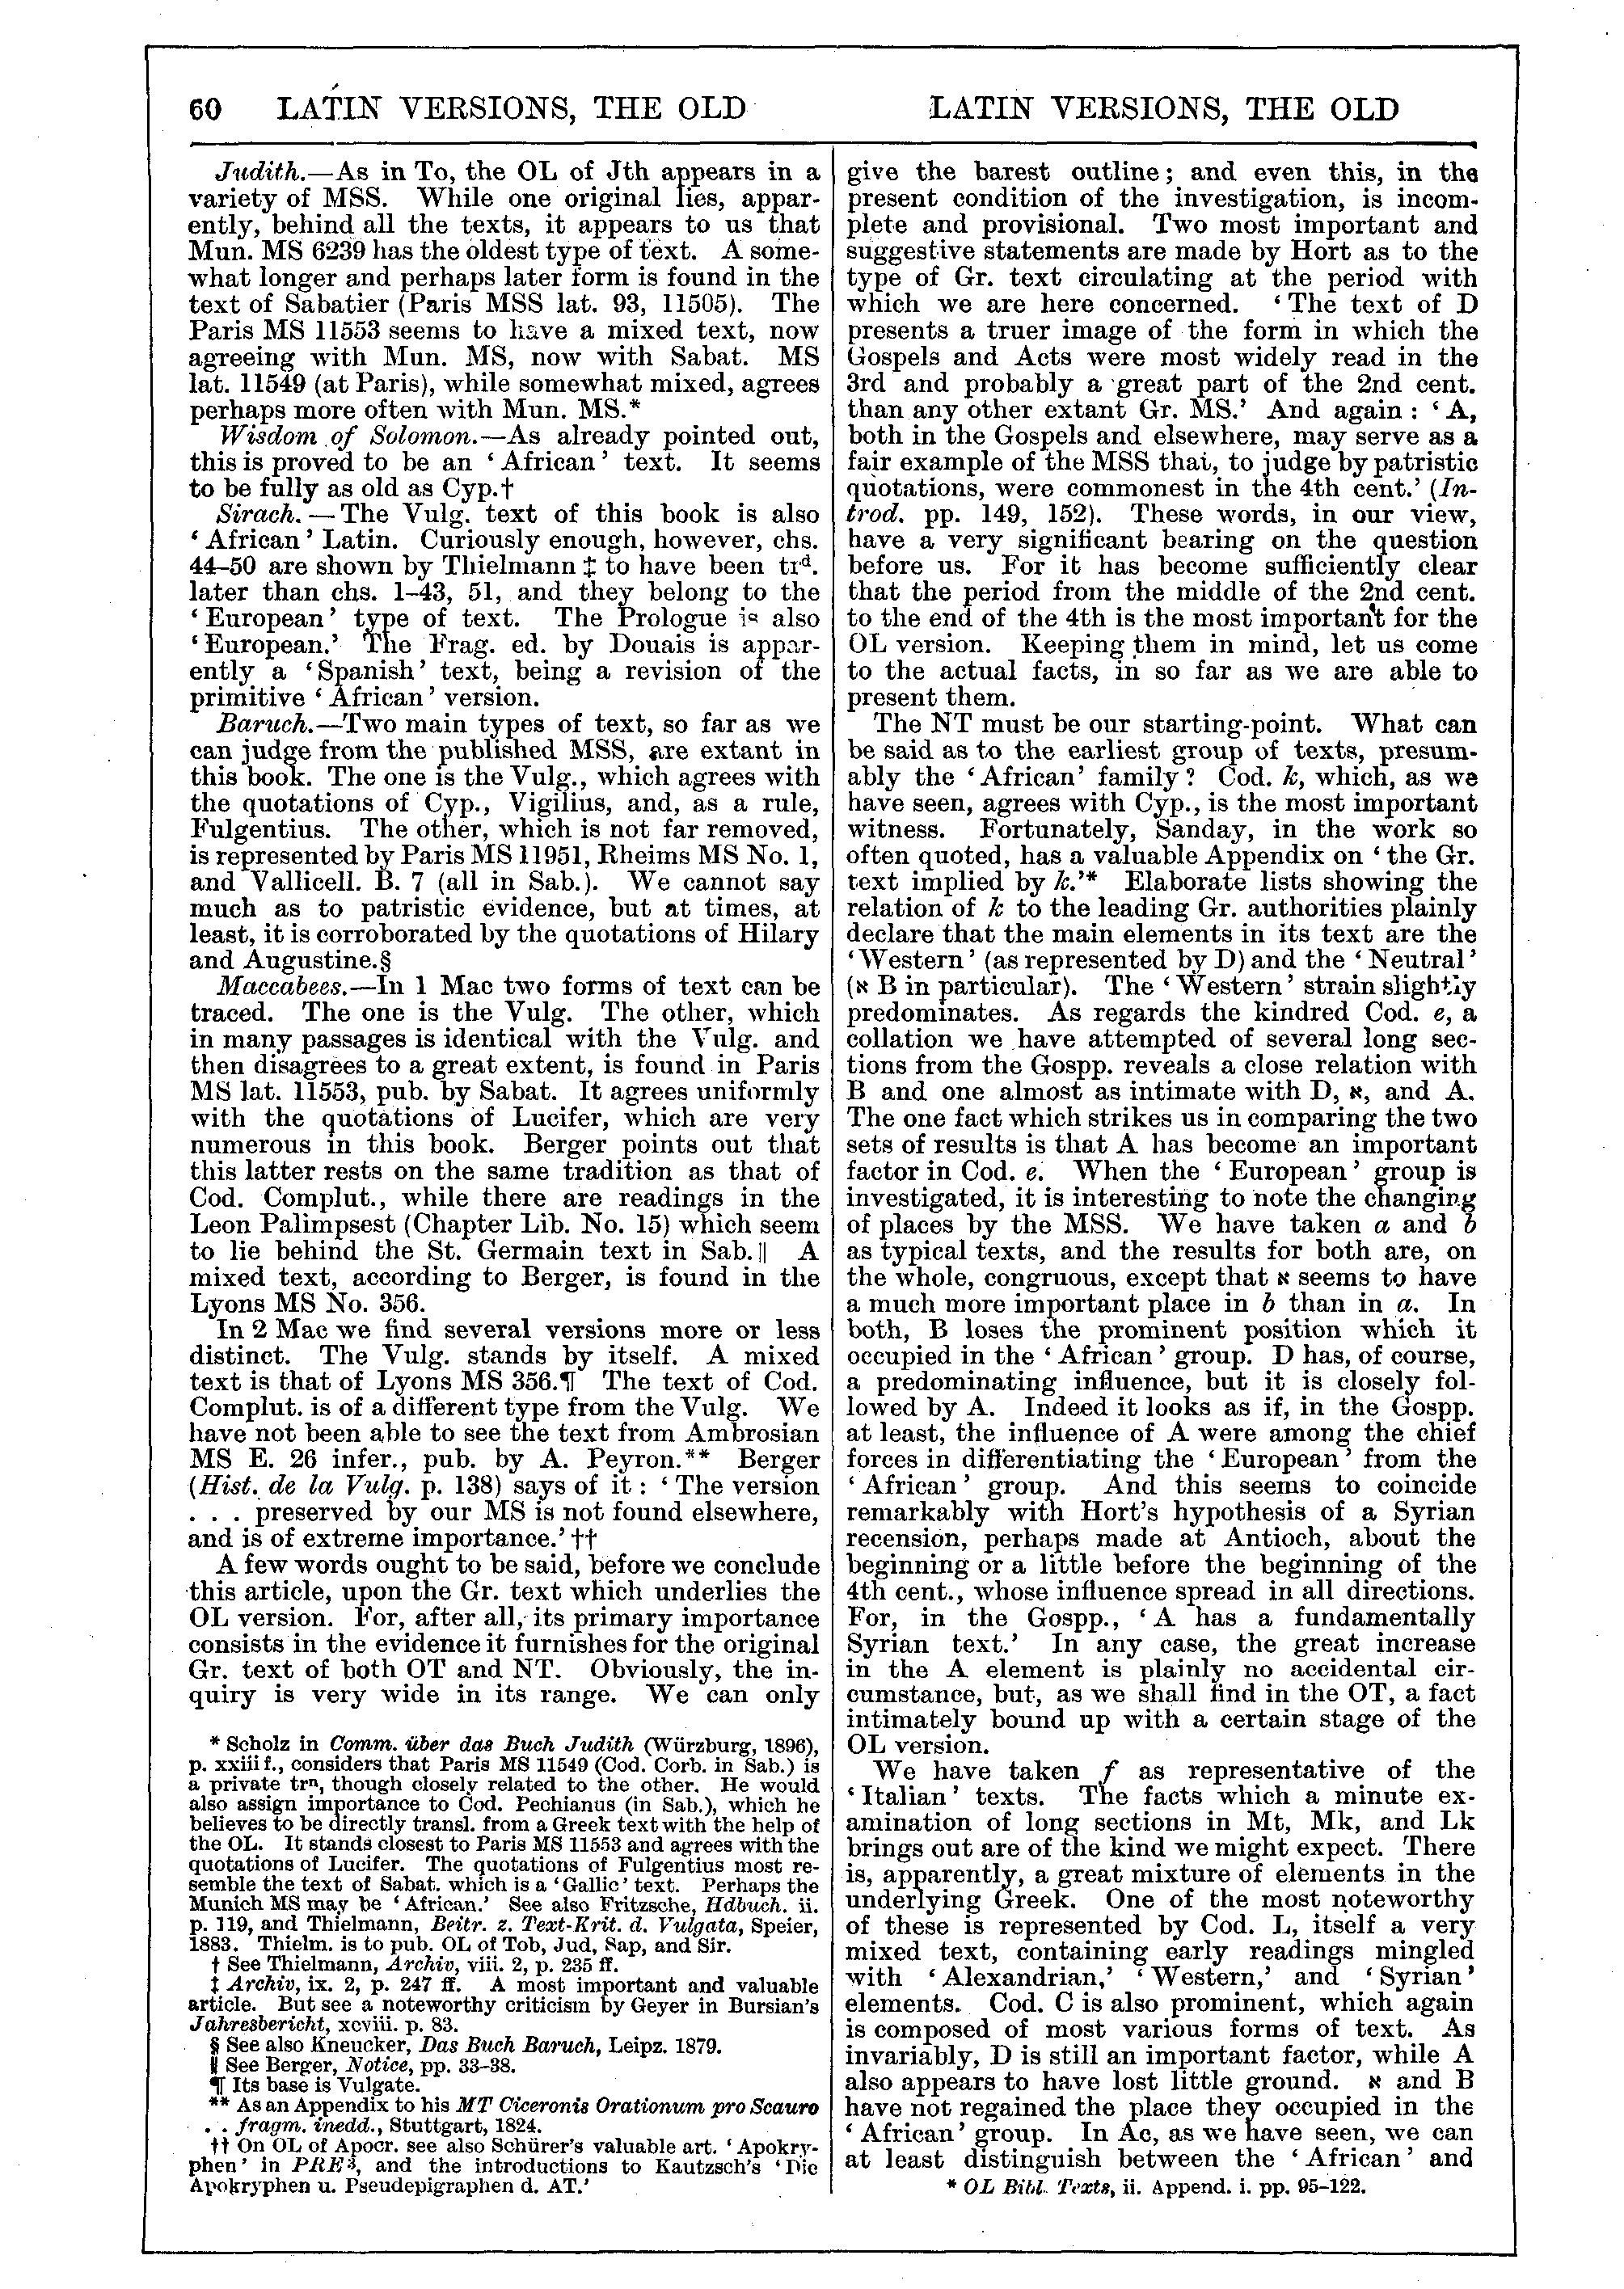 Image of page 60